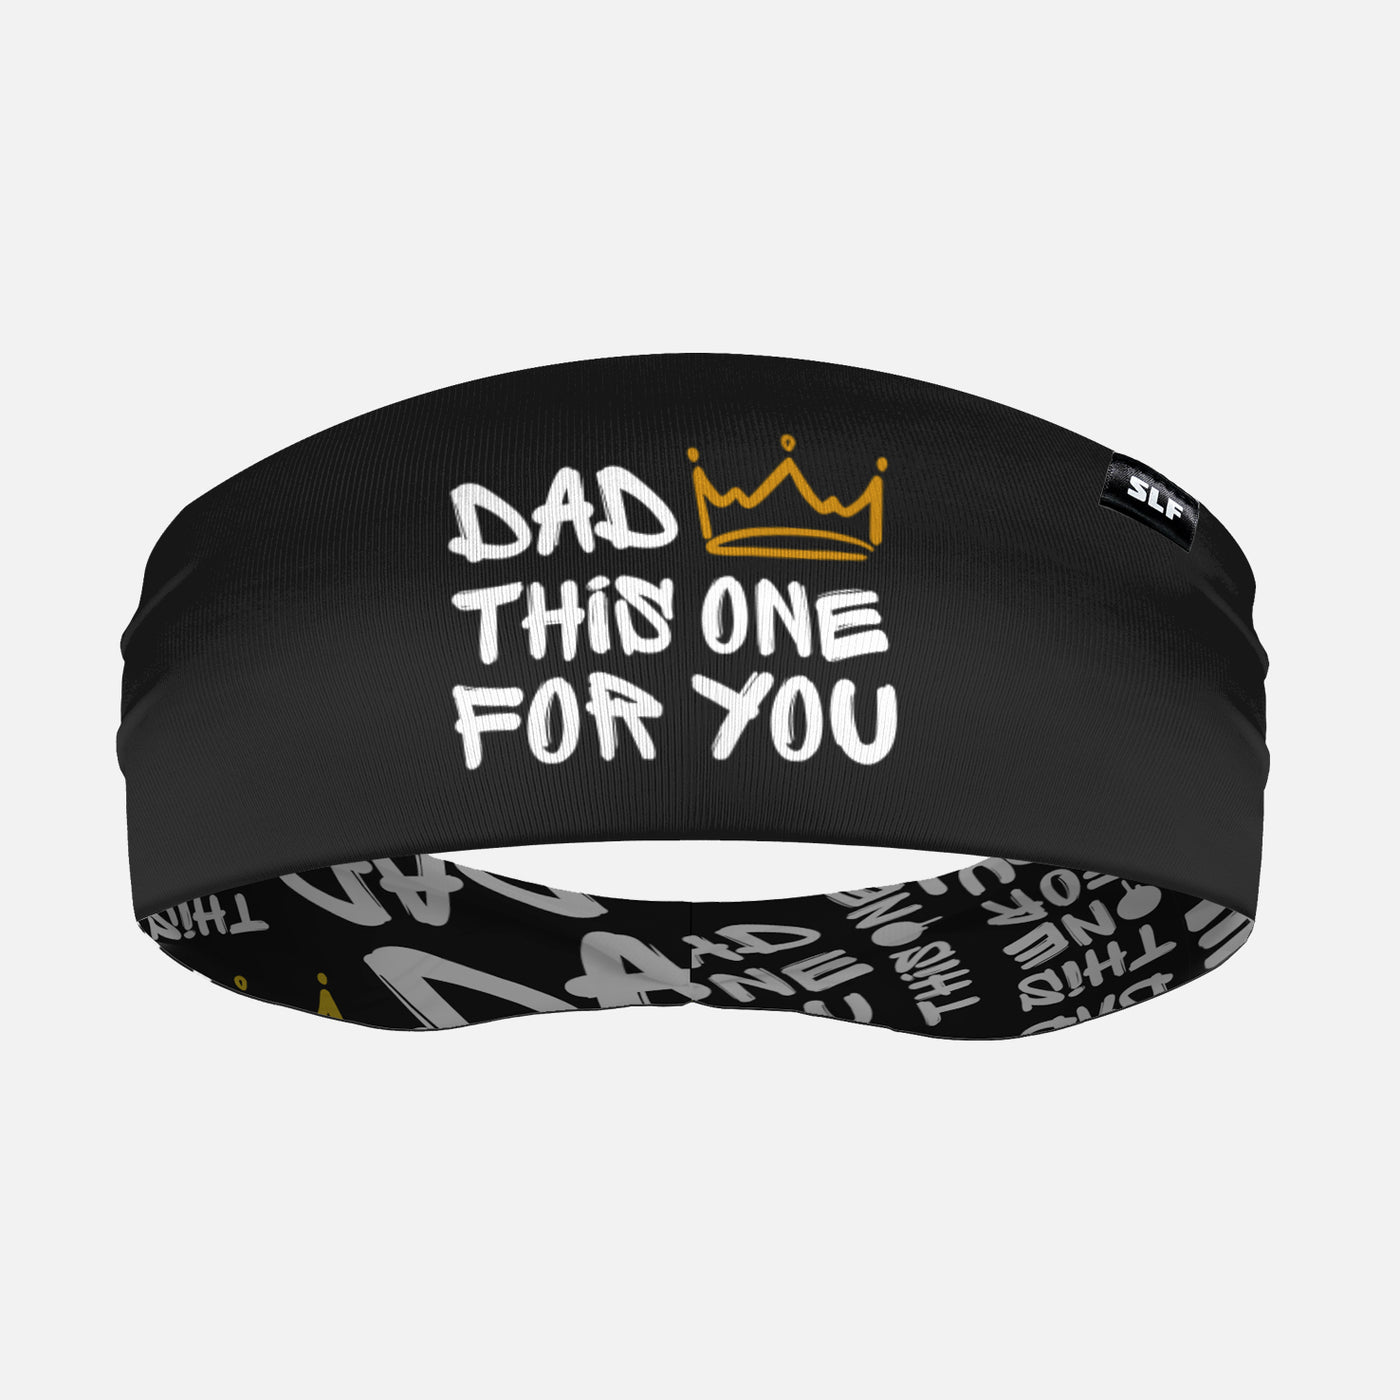 Dad This One For You Headband